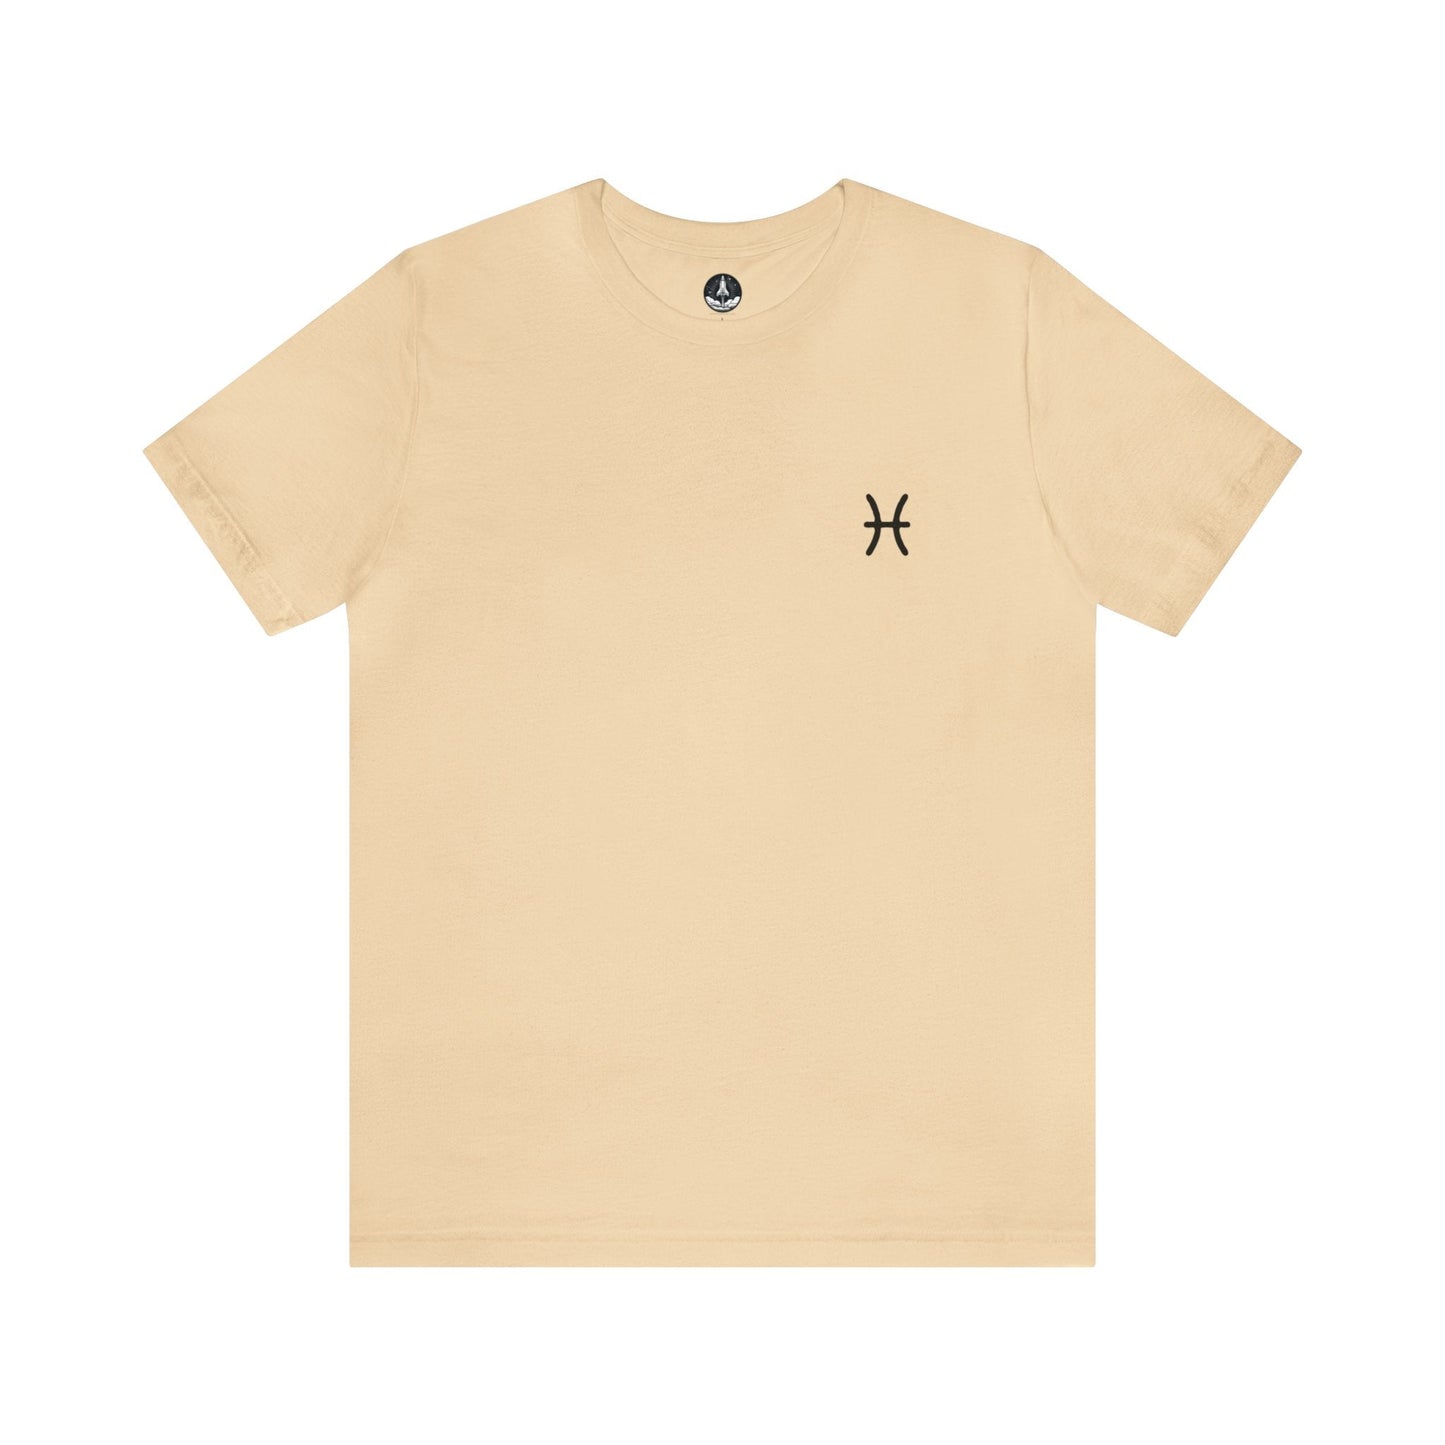 T-Shirt Soft Cream / S Pisces Fish Silhouette T-Shirt: Dreamy Comfort for the Compassionate Soul